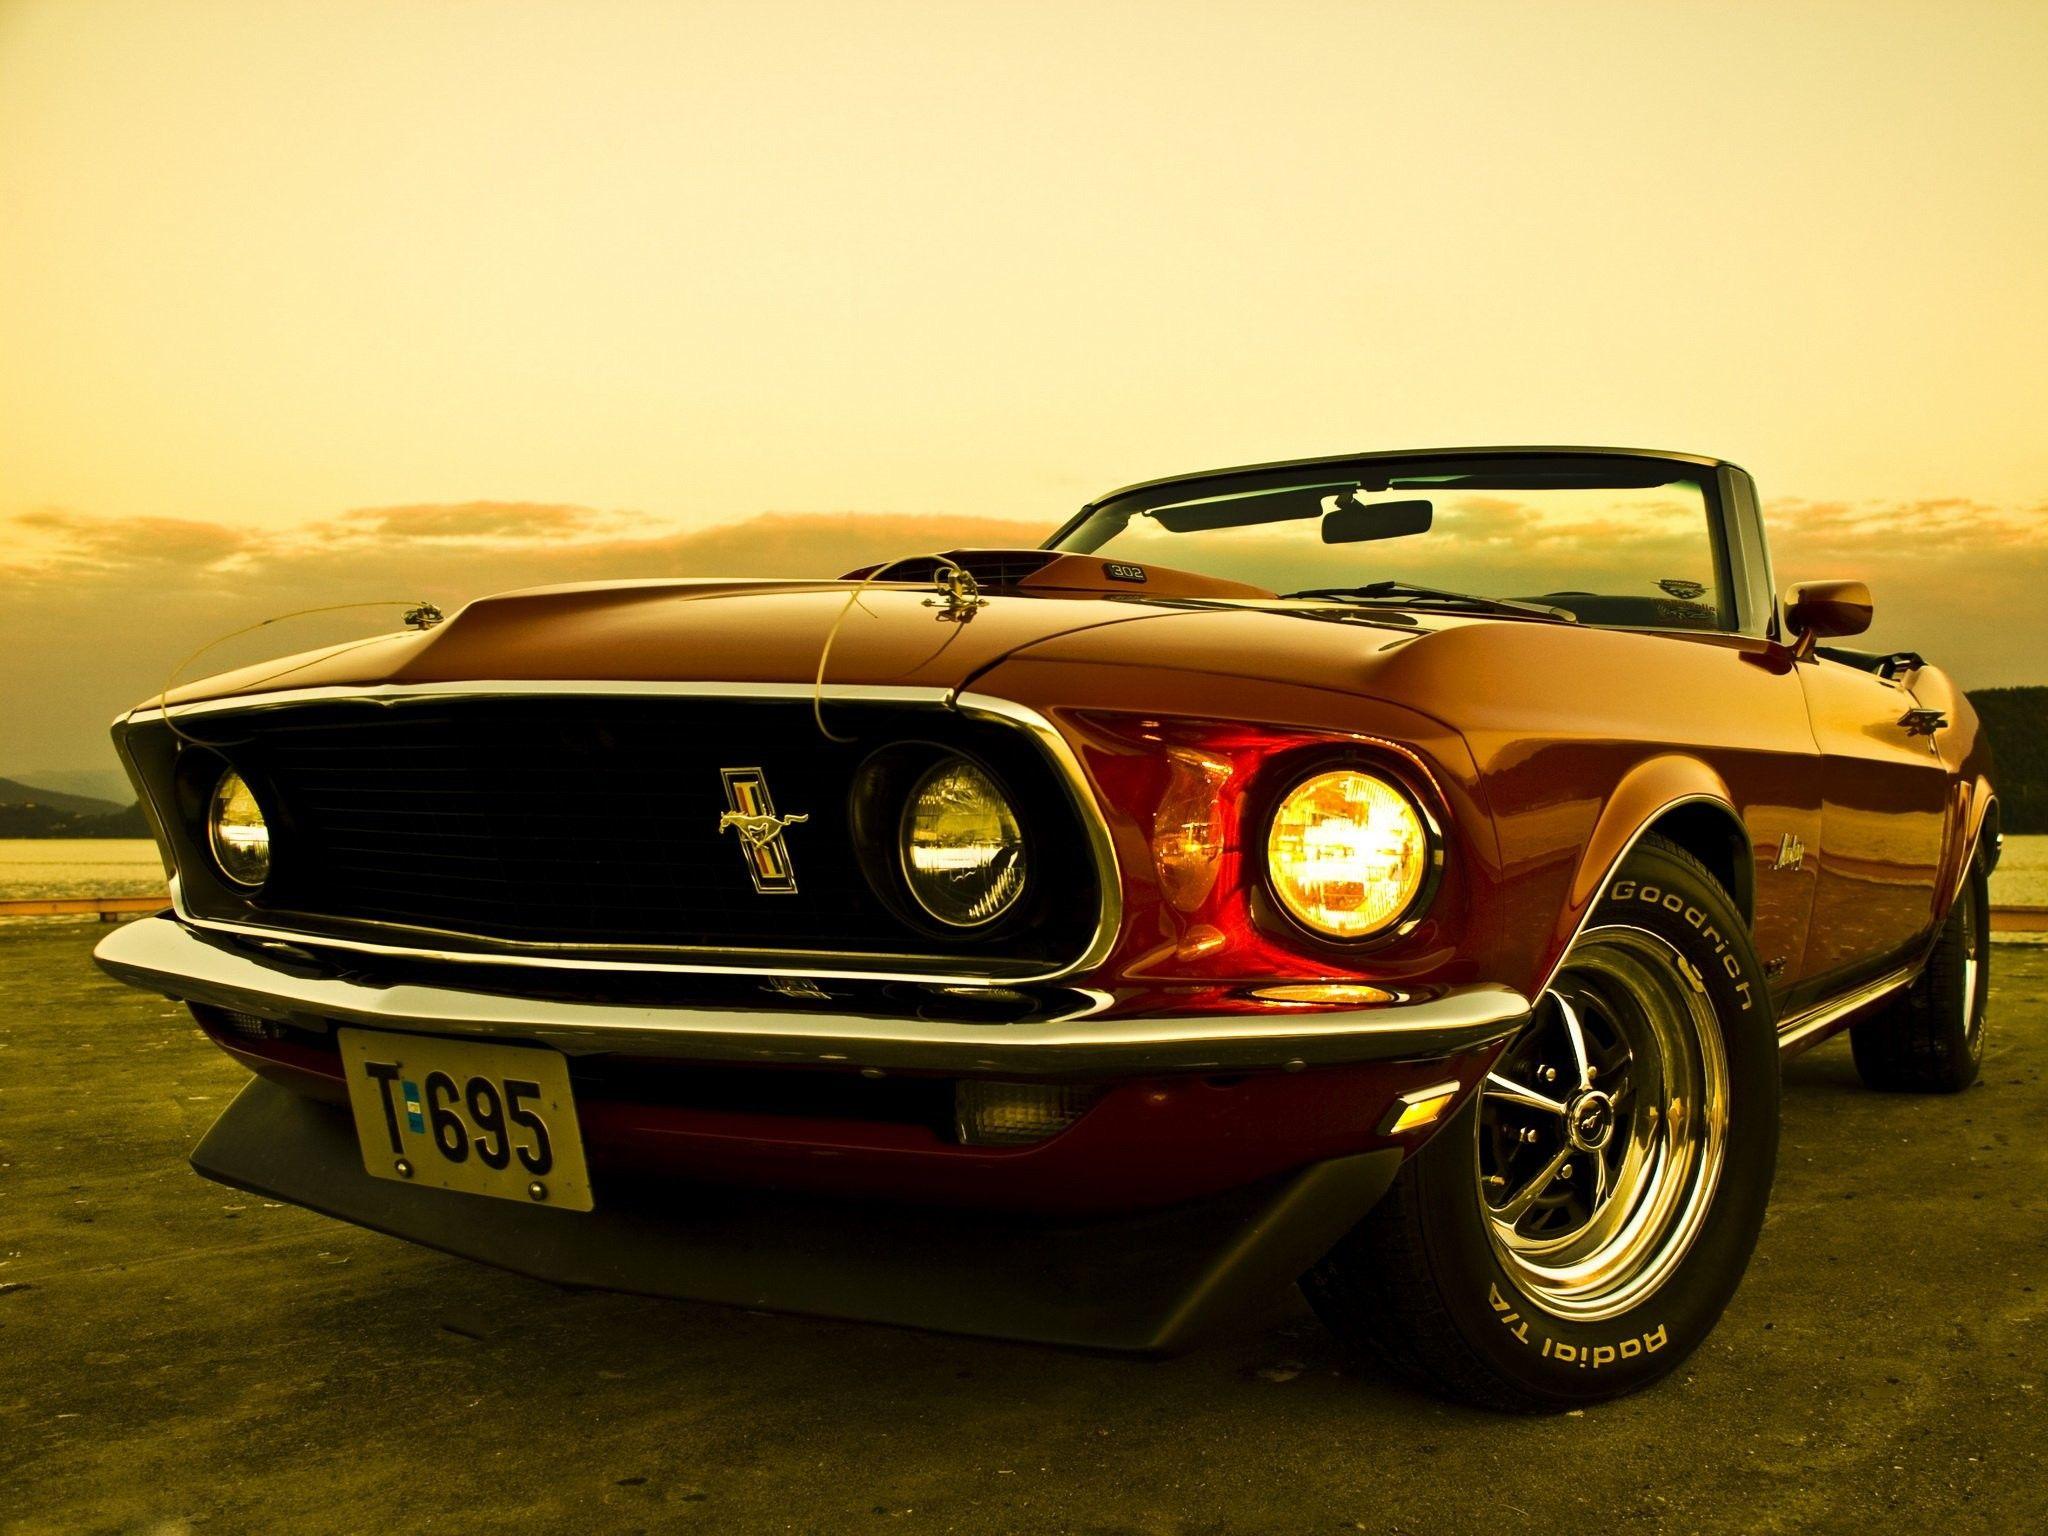 Vintage Mustang Wallpapers Top Free Vintage Mustang Backgrounds Wallpaperaccess